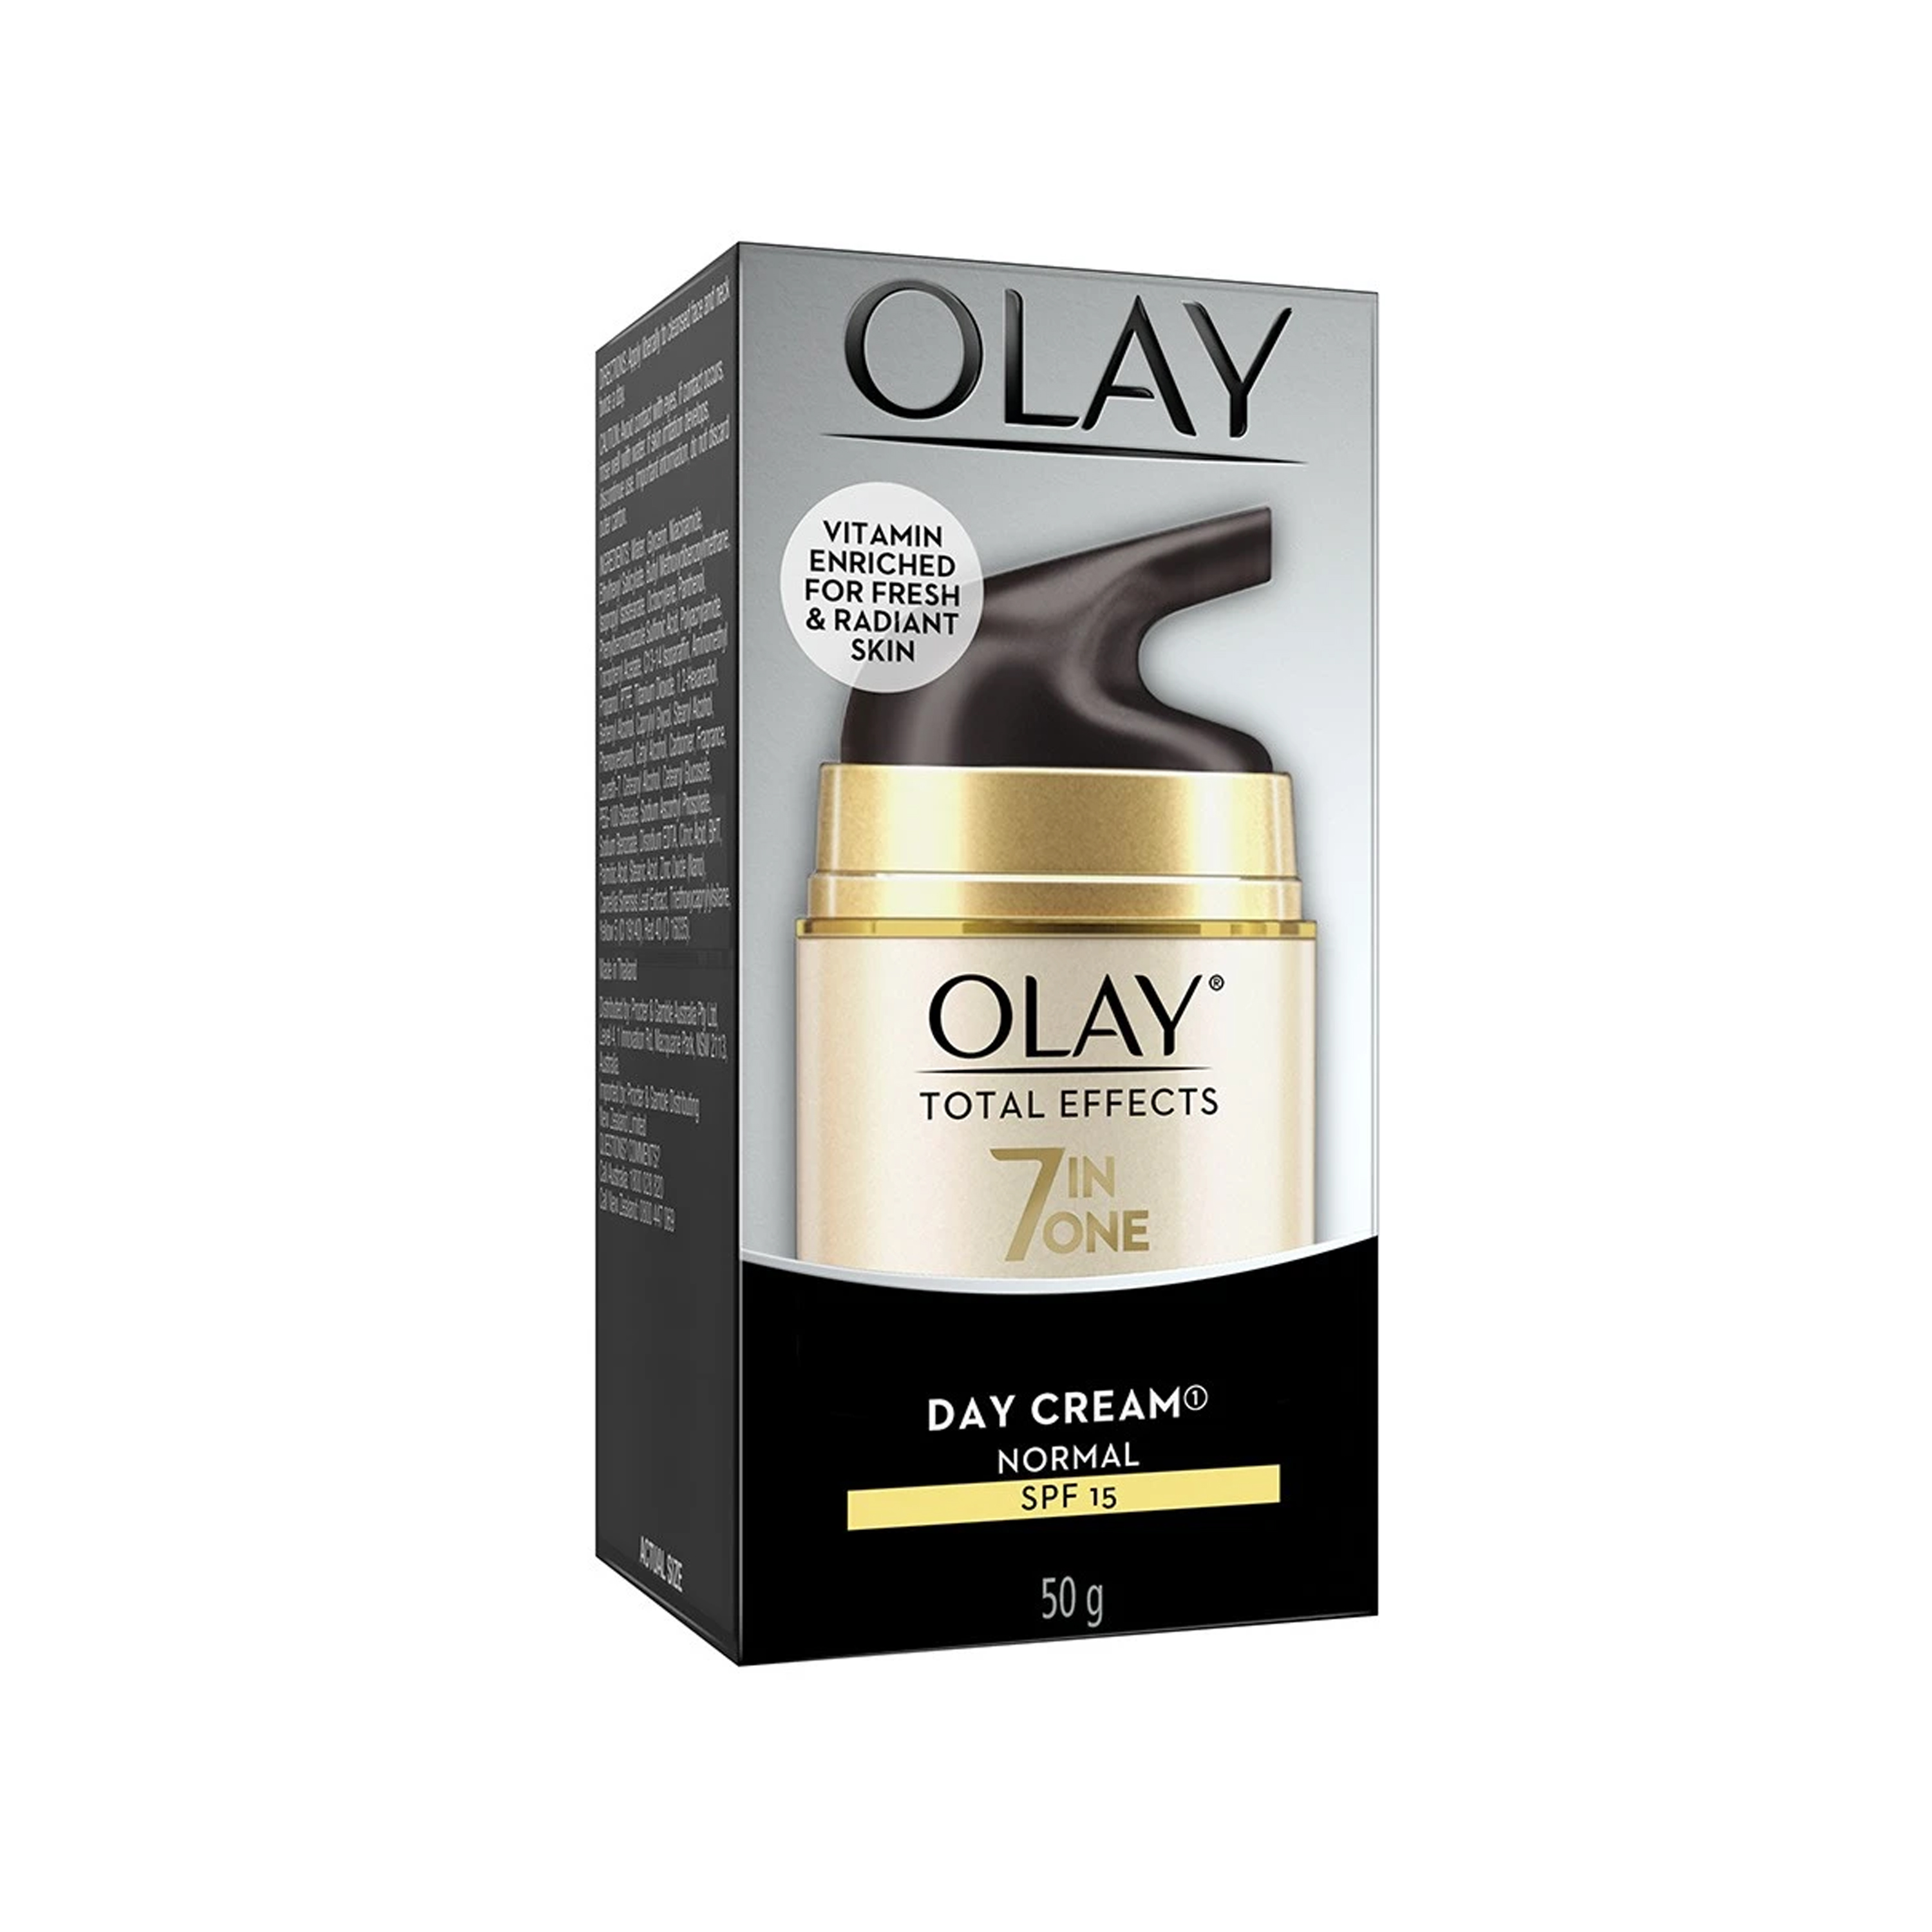 Olay Total Effects 7 in One Day Cream Normal SPF15